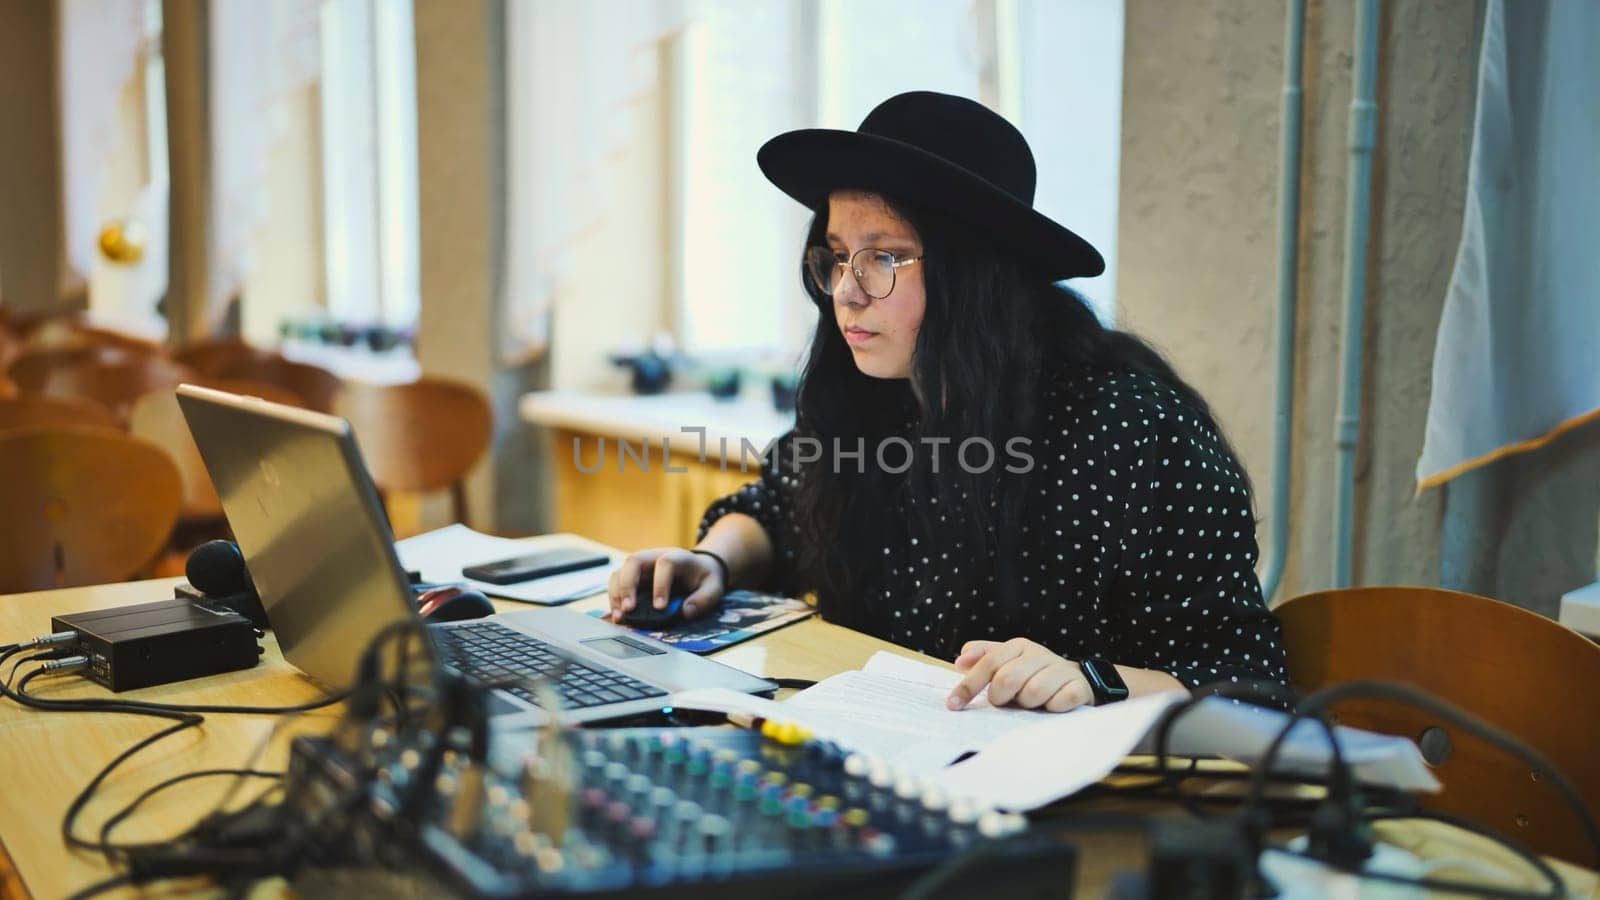 A schoolgirl wearing a hat at a mixing console and computer before an event